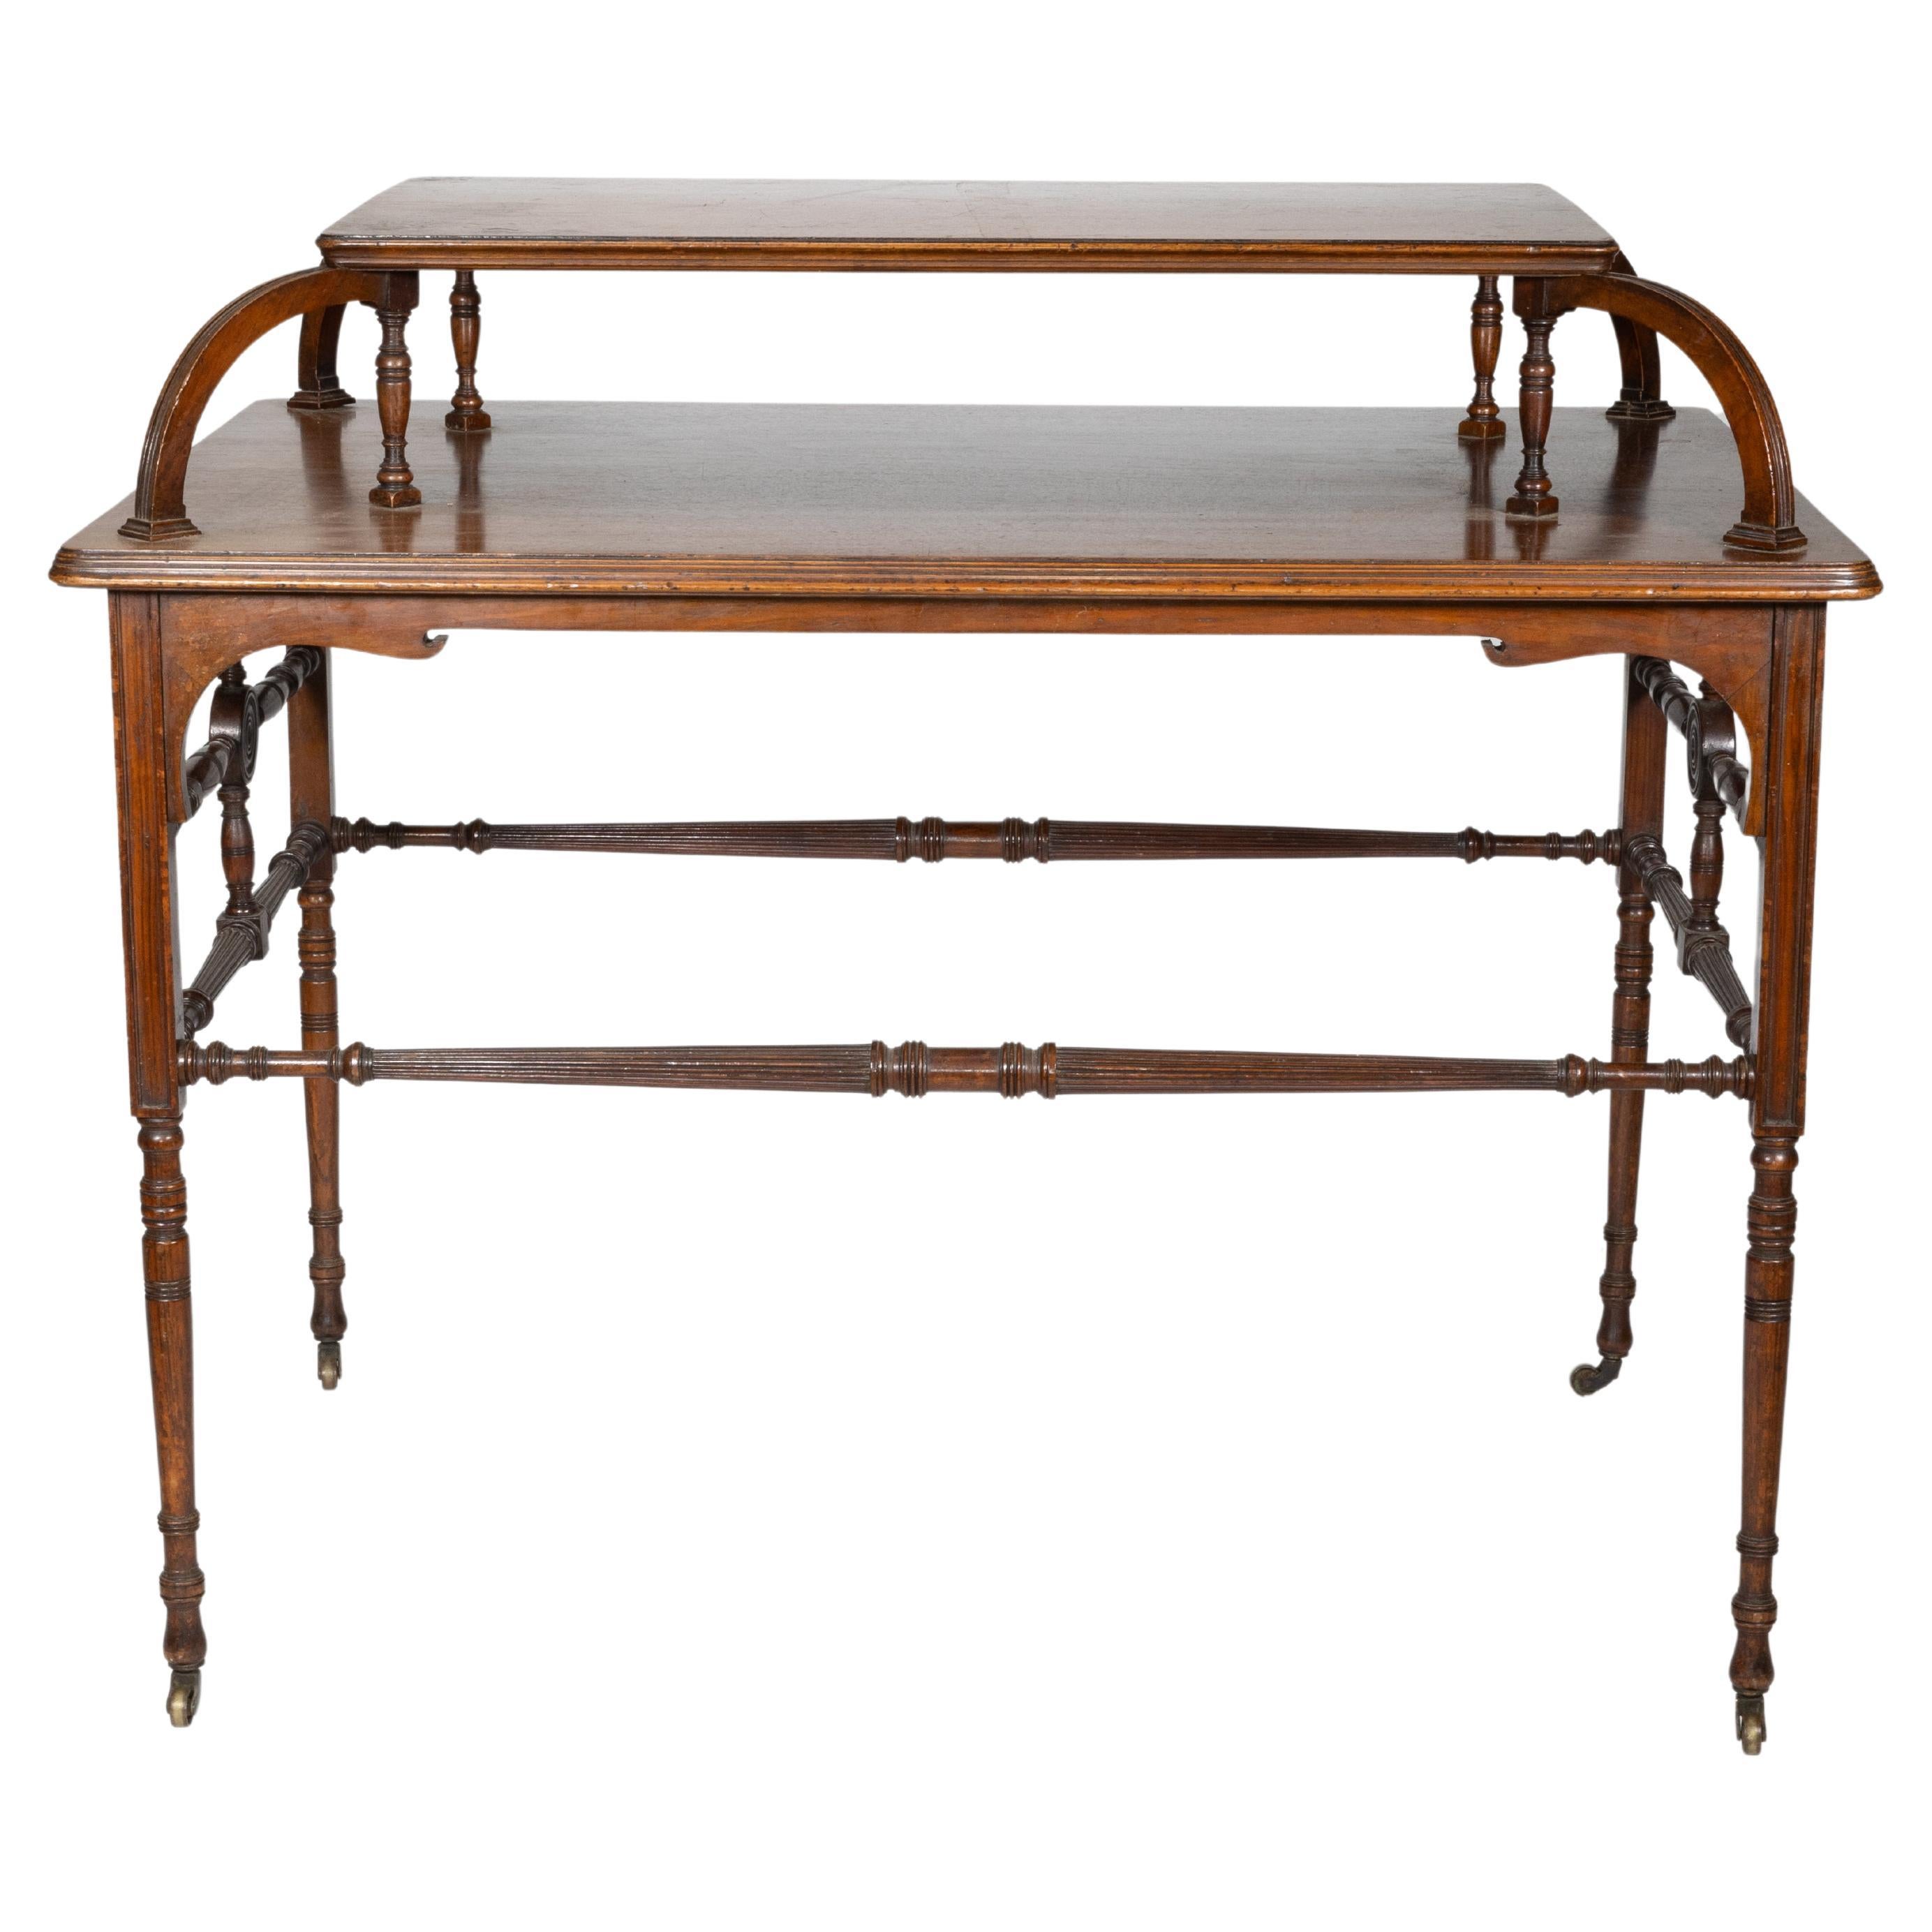 Howard and Sons. A high art Aesthetic Movement walnut centre tea table with an unusual raised upper shelf to the centre of the main top on arched and turned supports. The top with shaped and incised aprons to the corners with fine turned legs united